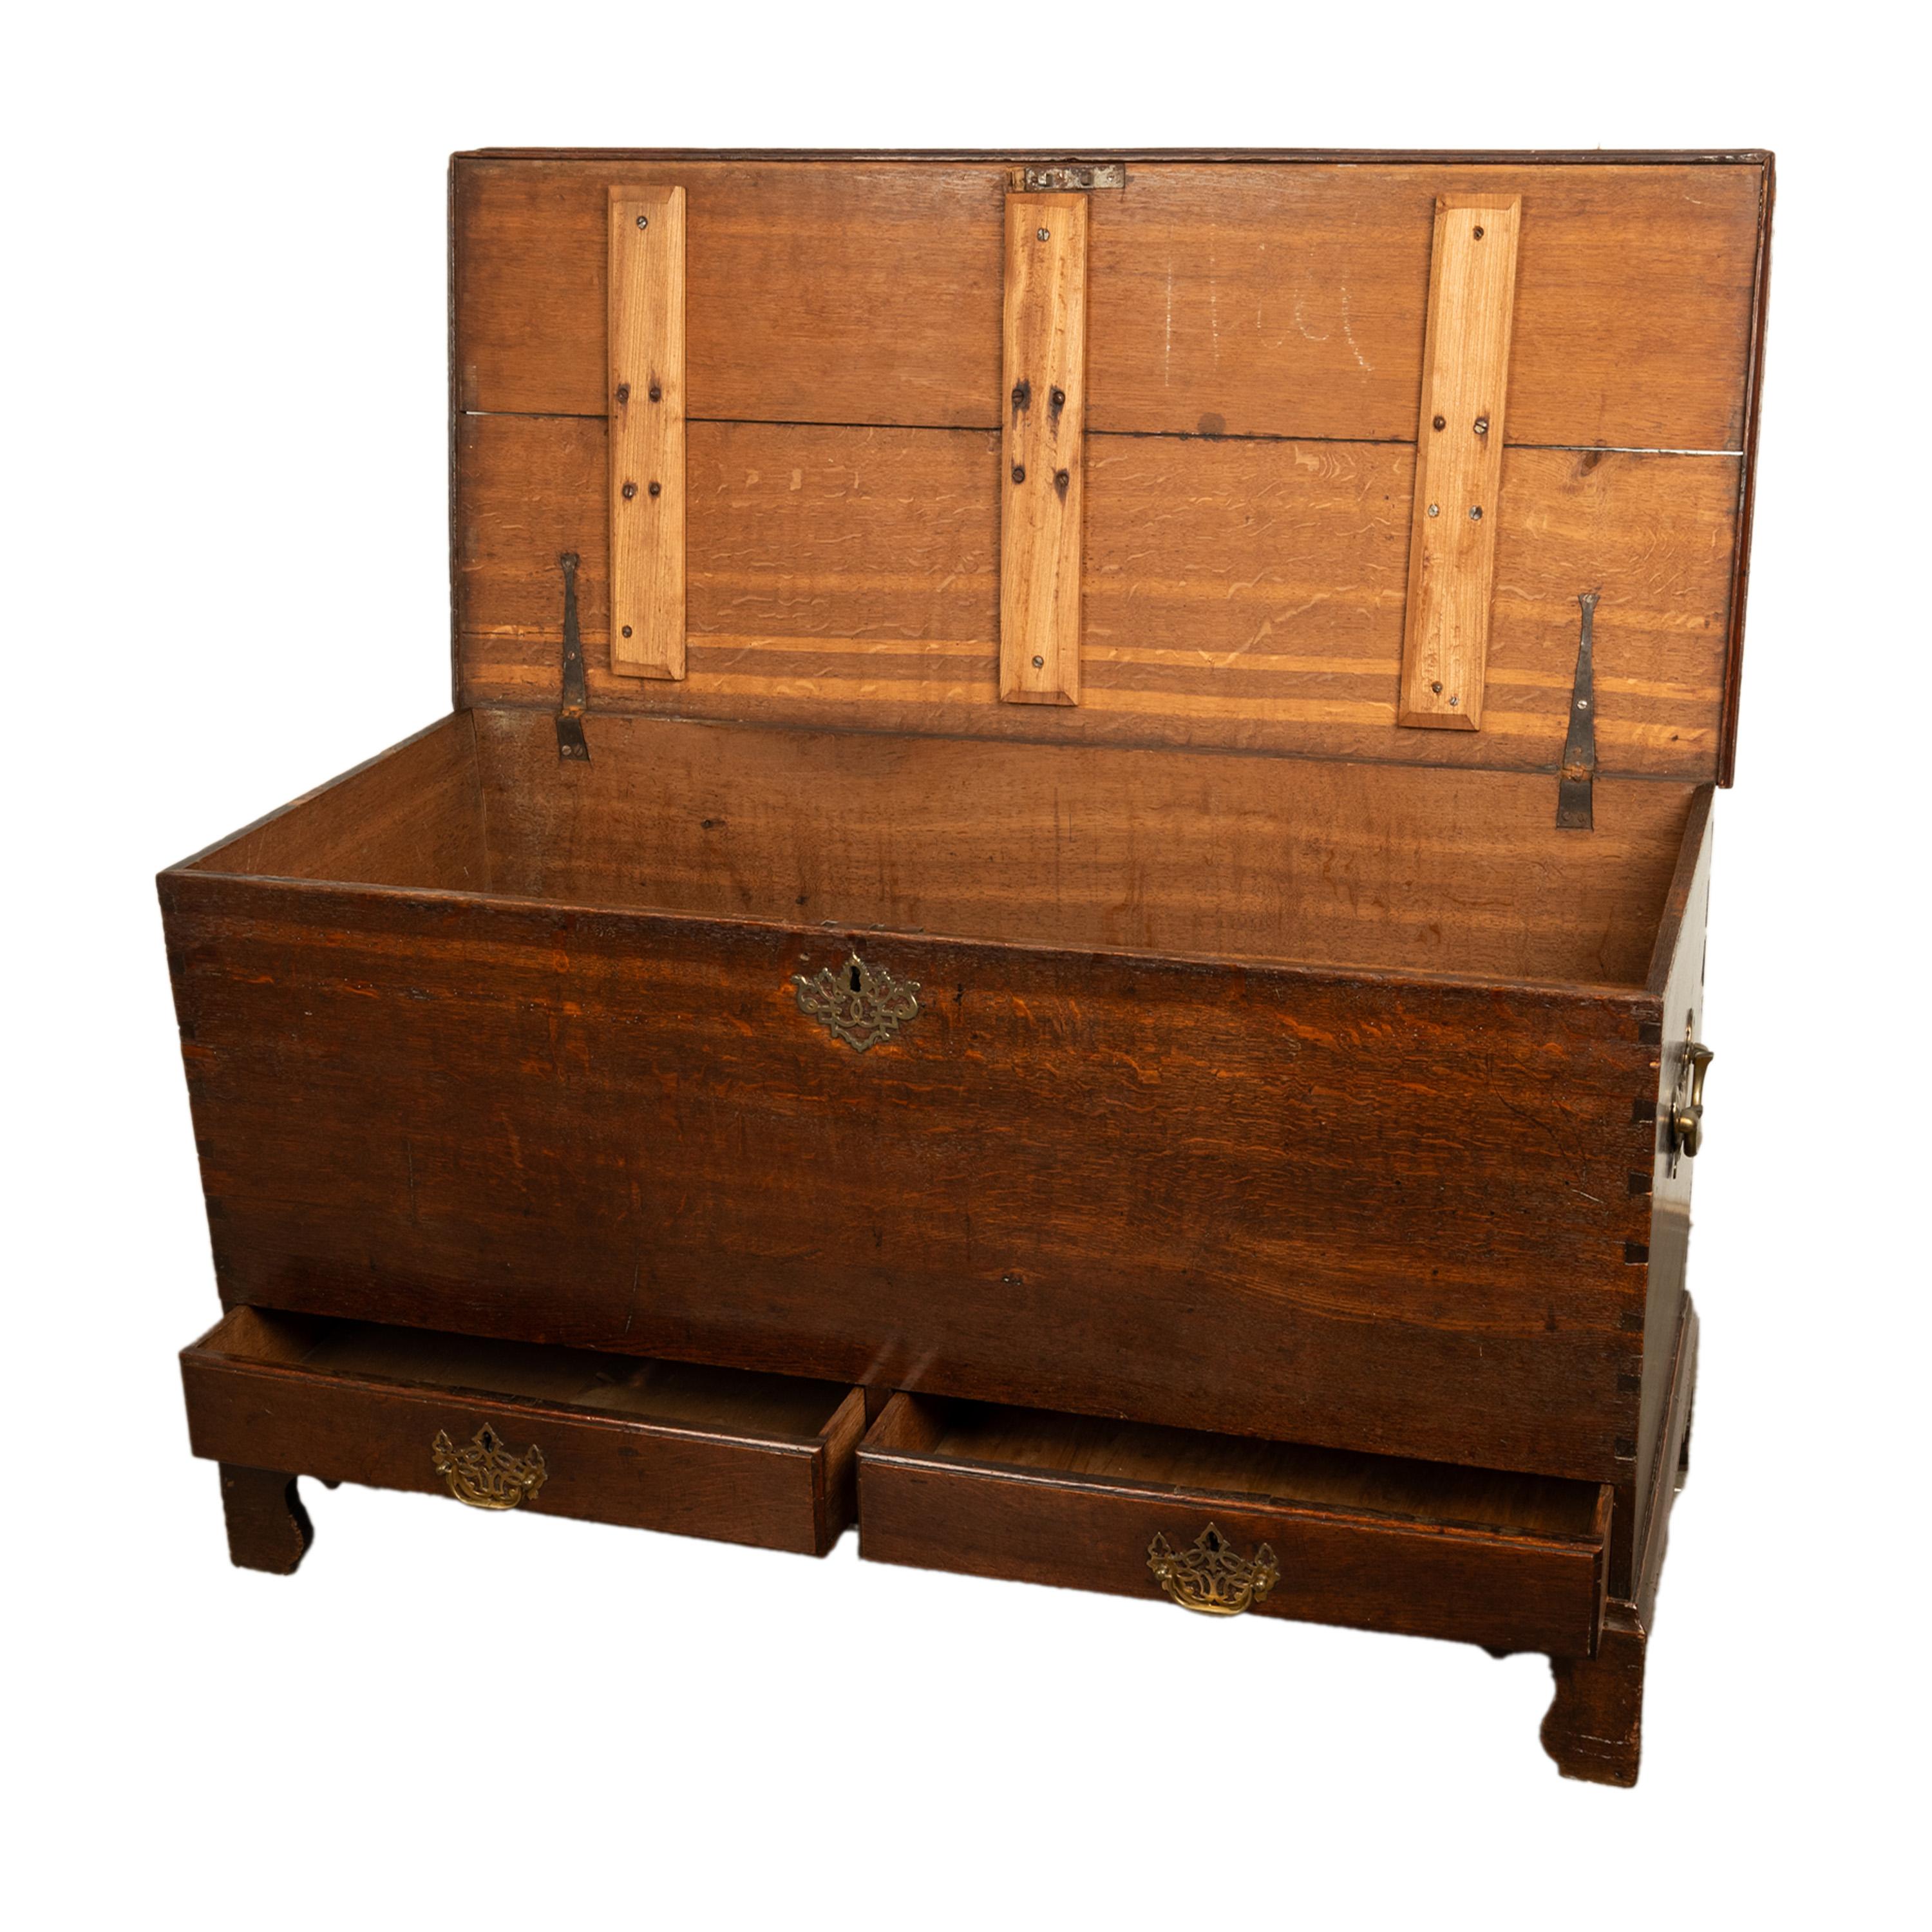 Antique George III Georgian Oak Dovetailed Mule Chest Coffer Drawers 1760 For Sale 11